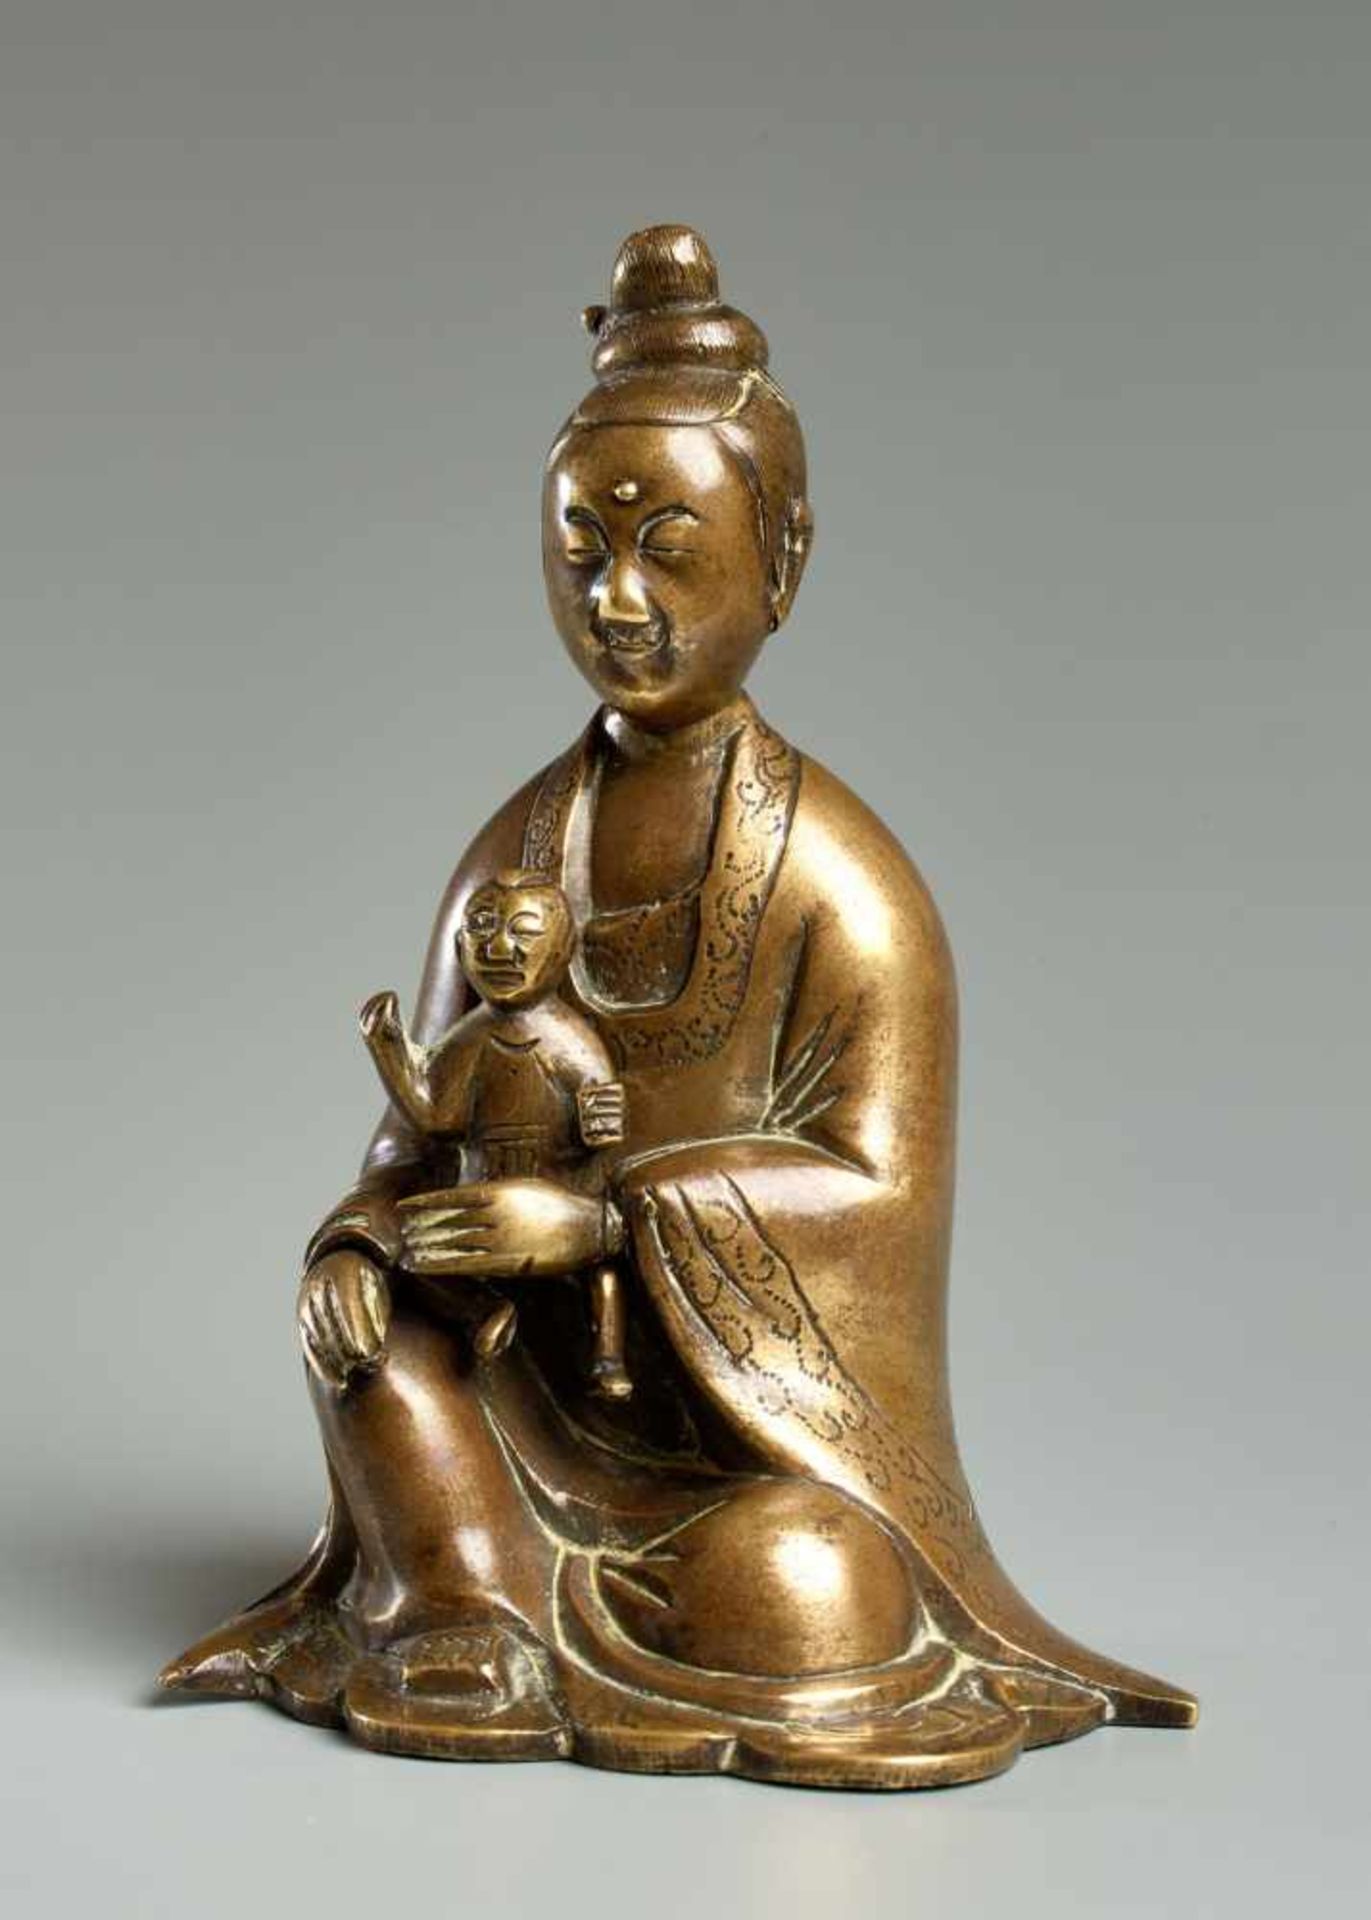 THE GODDESS GUANYIN WITH CHILD Yellow bronze. China, 18th cent. Probably the most beloved “deity” in